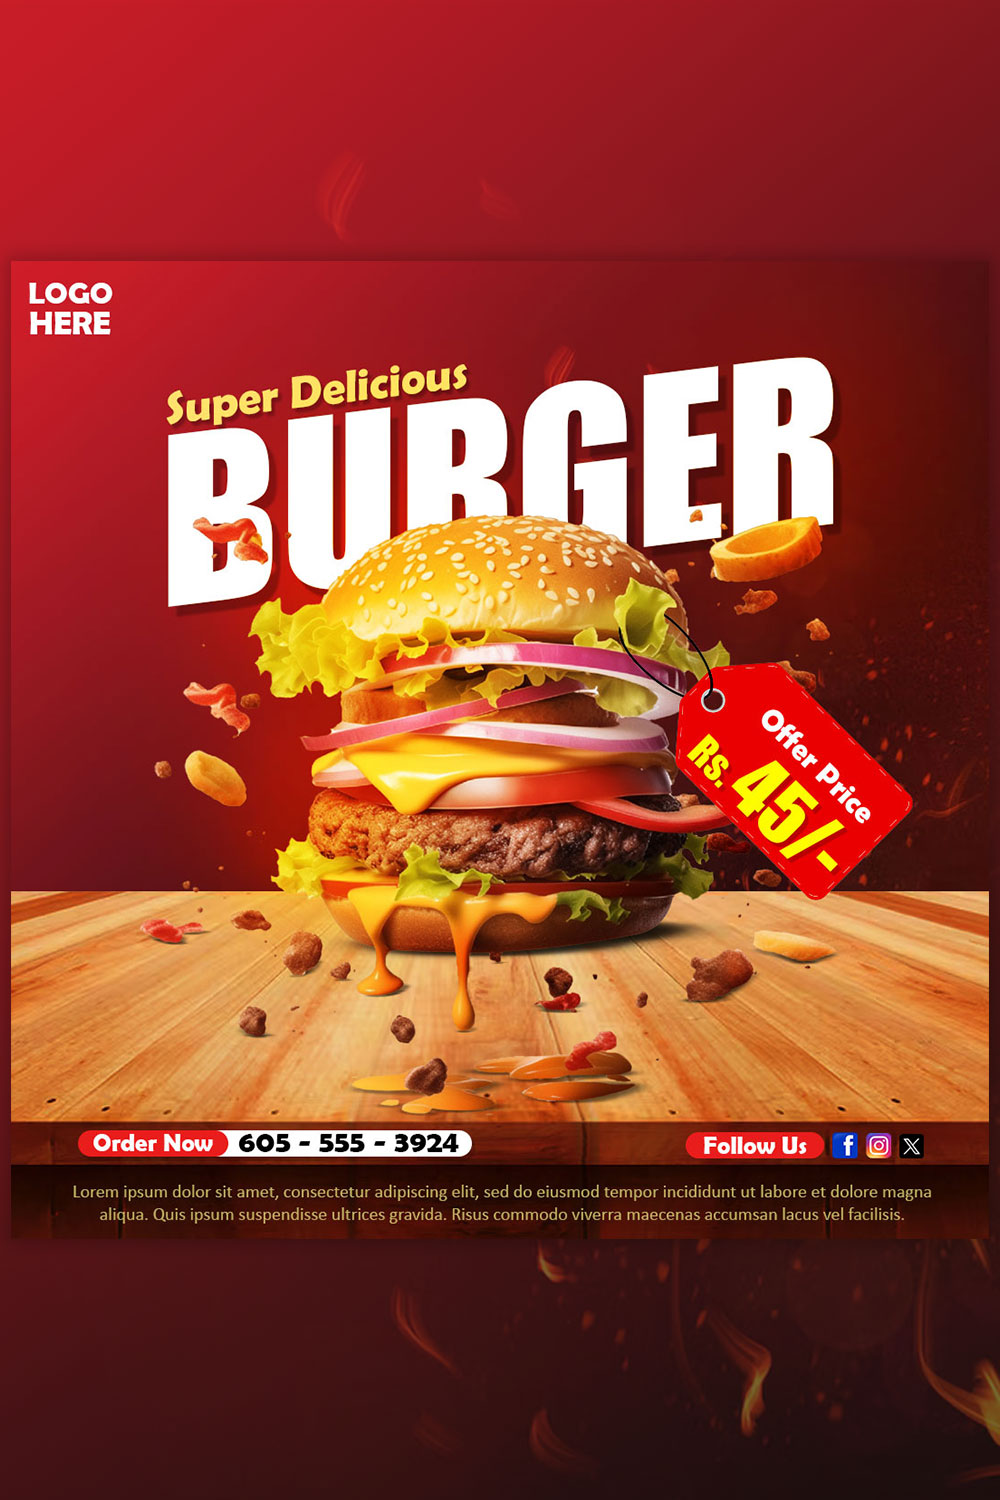 Super Delicious burger and food menu social media banner or Instagram post template pinterest preview image.